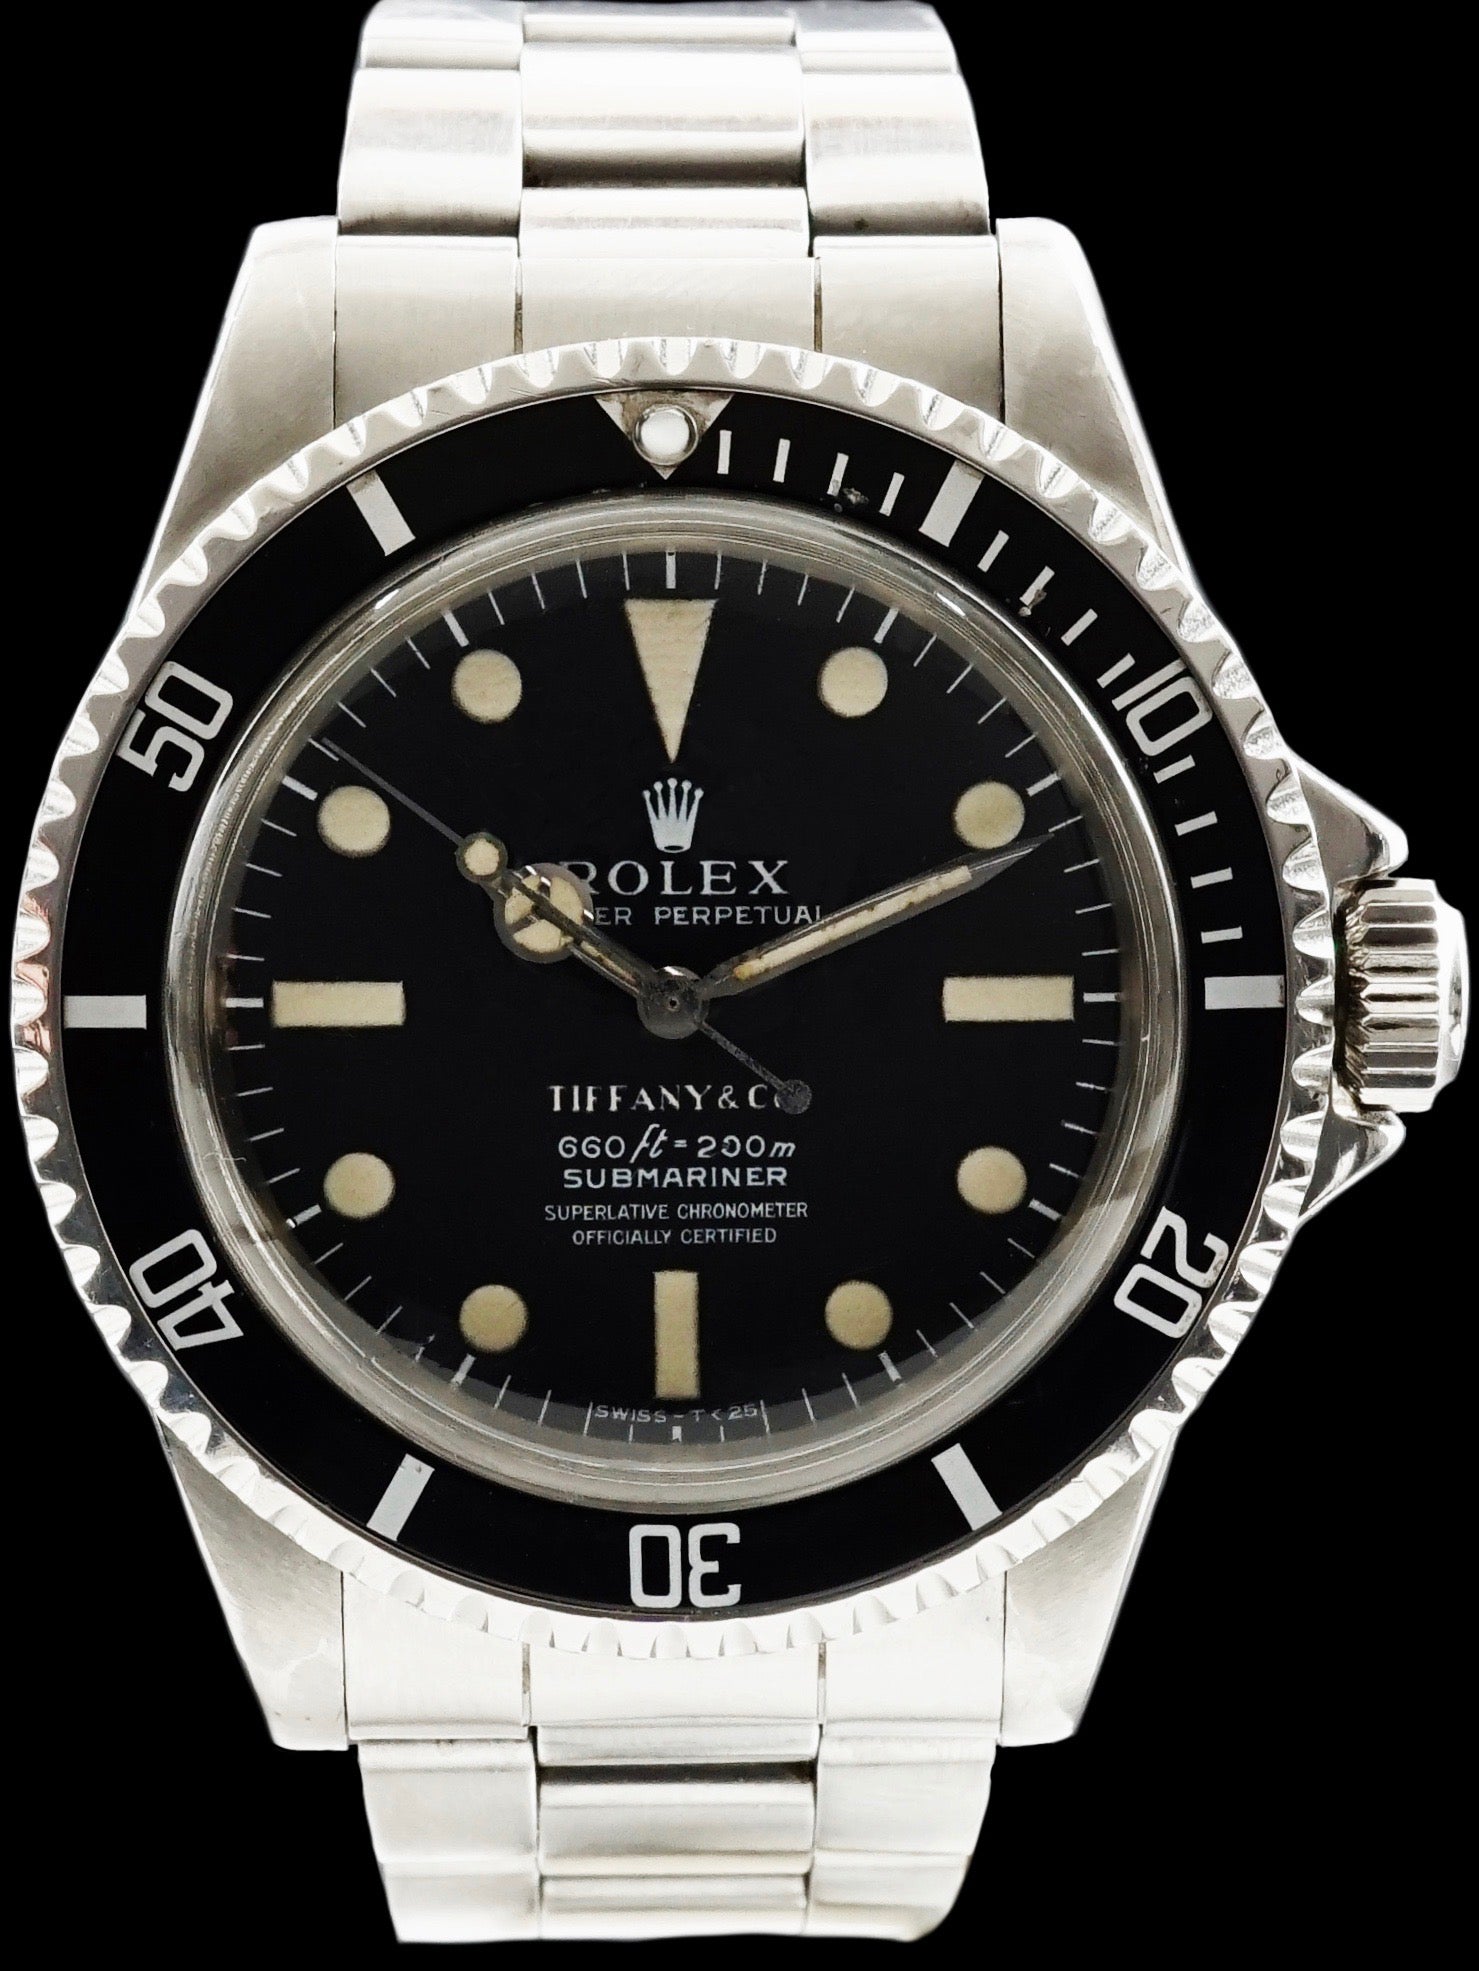 rolex tiffany submariner for sale